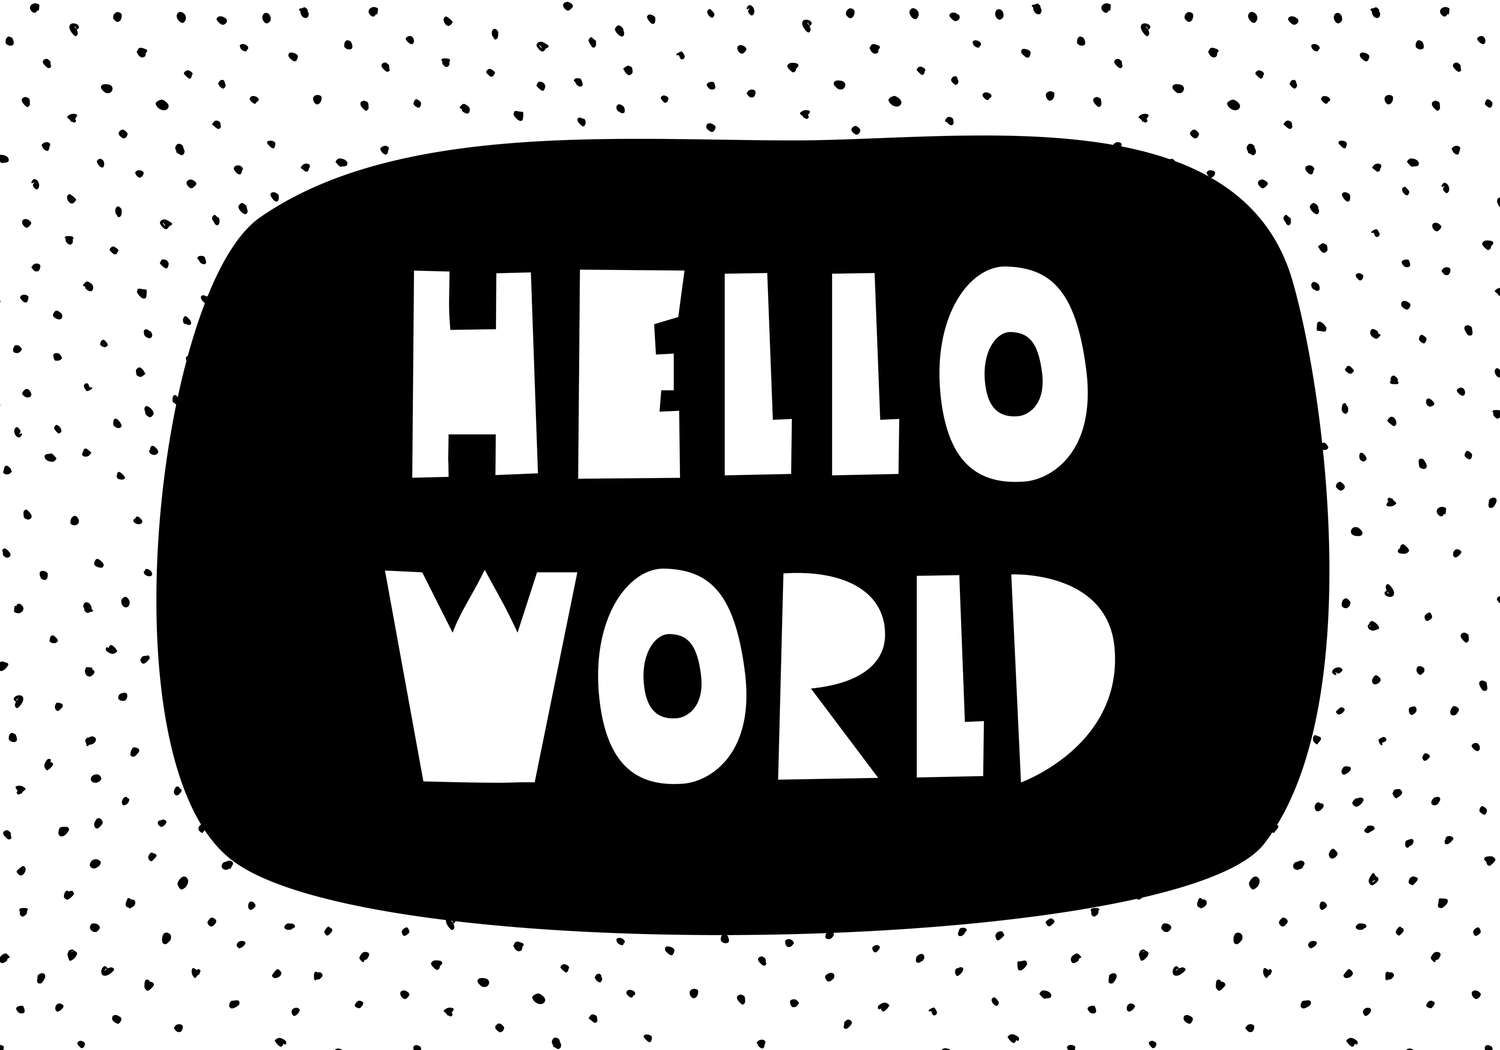             Photo wallpaper for children's room with lettering "Hello World" - Smooth & slightly shiny non-woven
        